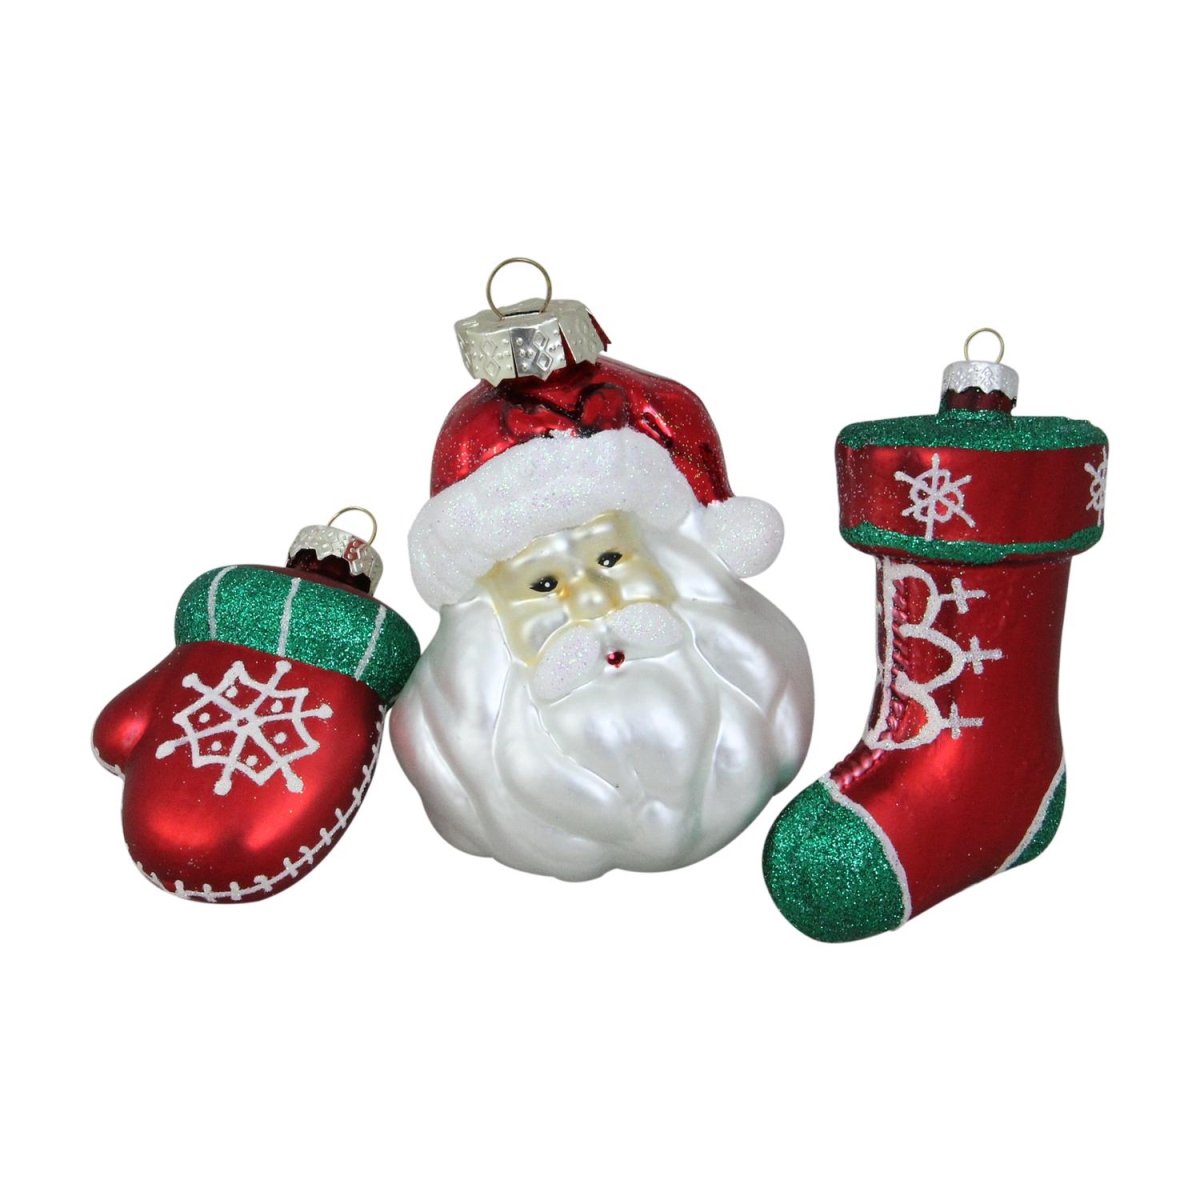 32608030 4.25 In. 3 - Piece Set Of Santa Mitten & Stocking Shaped Glass Christmas Ornaments